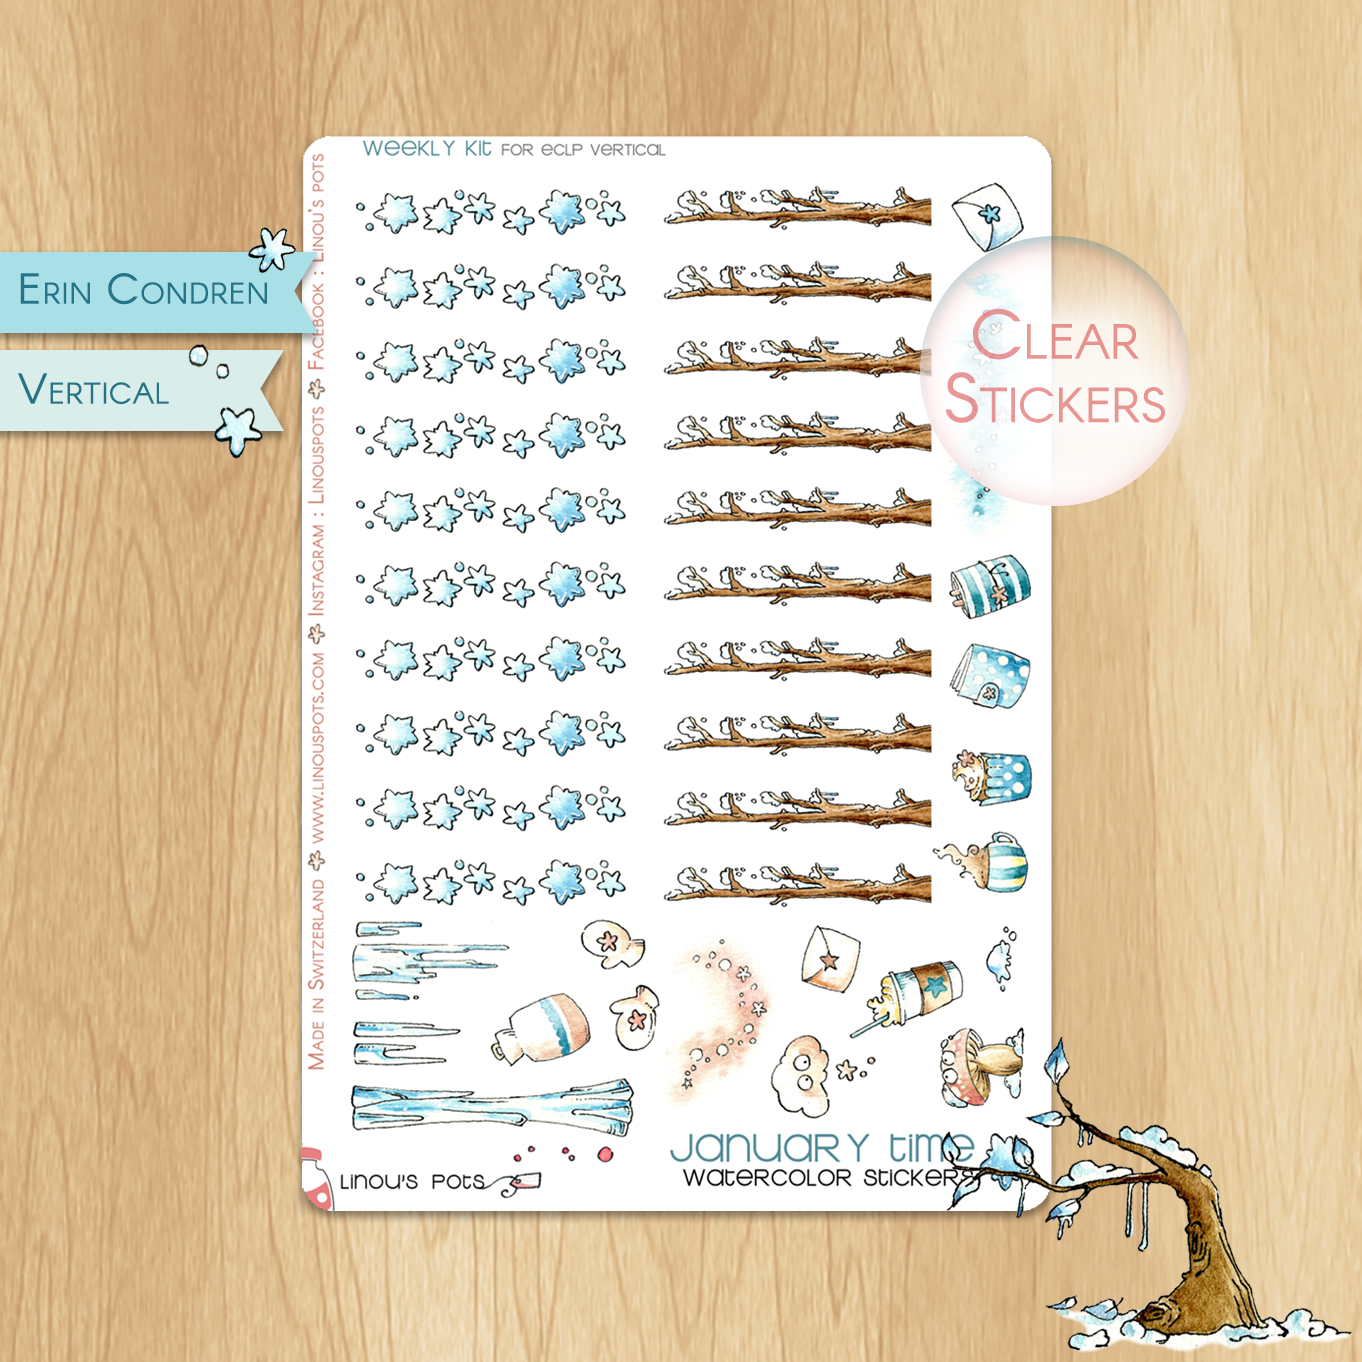 Frosty Times - Watercolor Planner Stickers - 20 Snowy Checklists